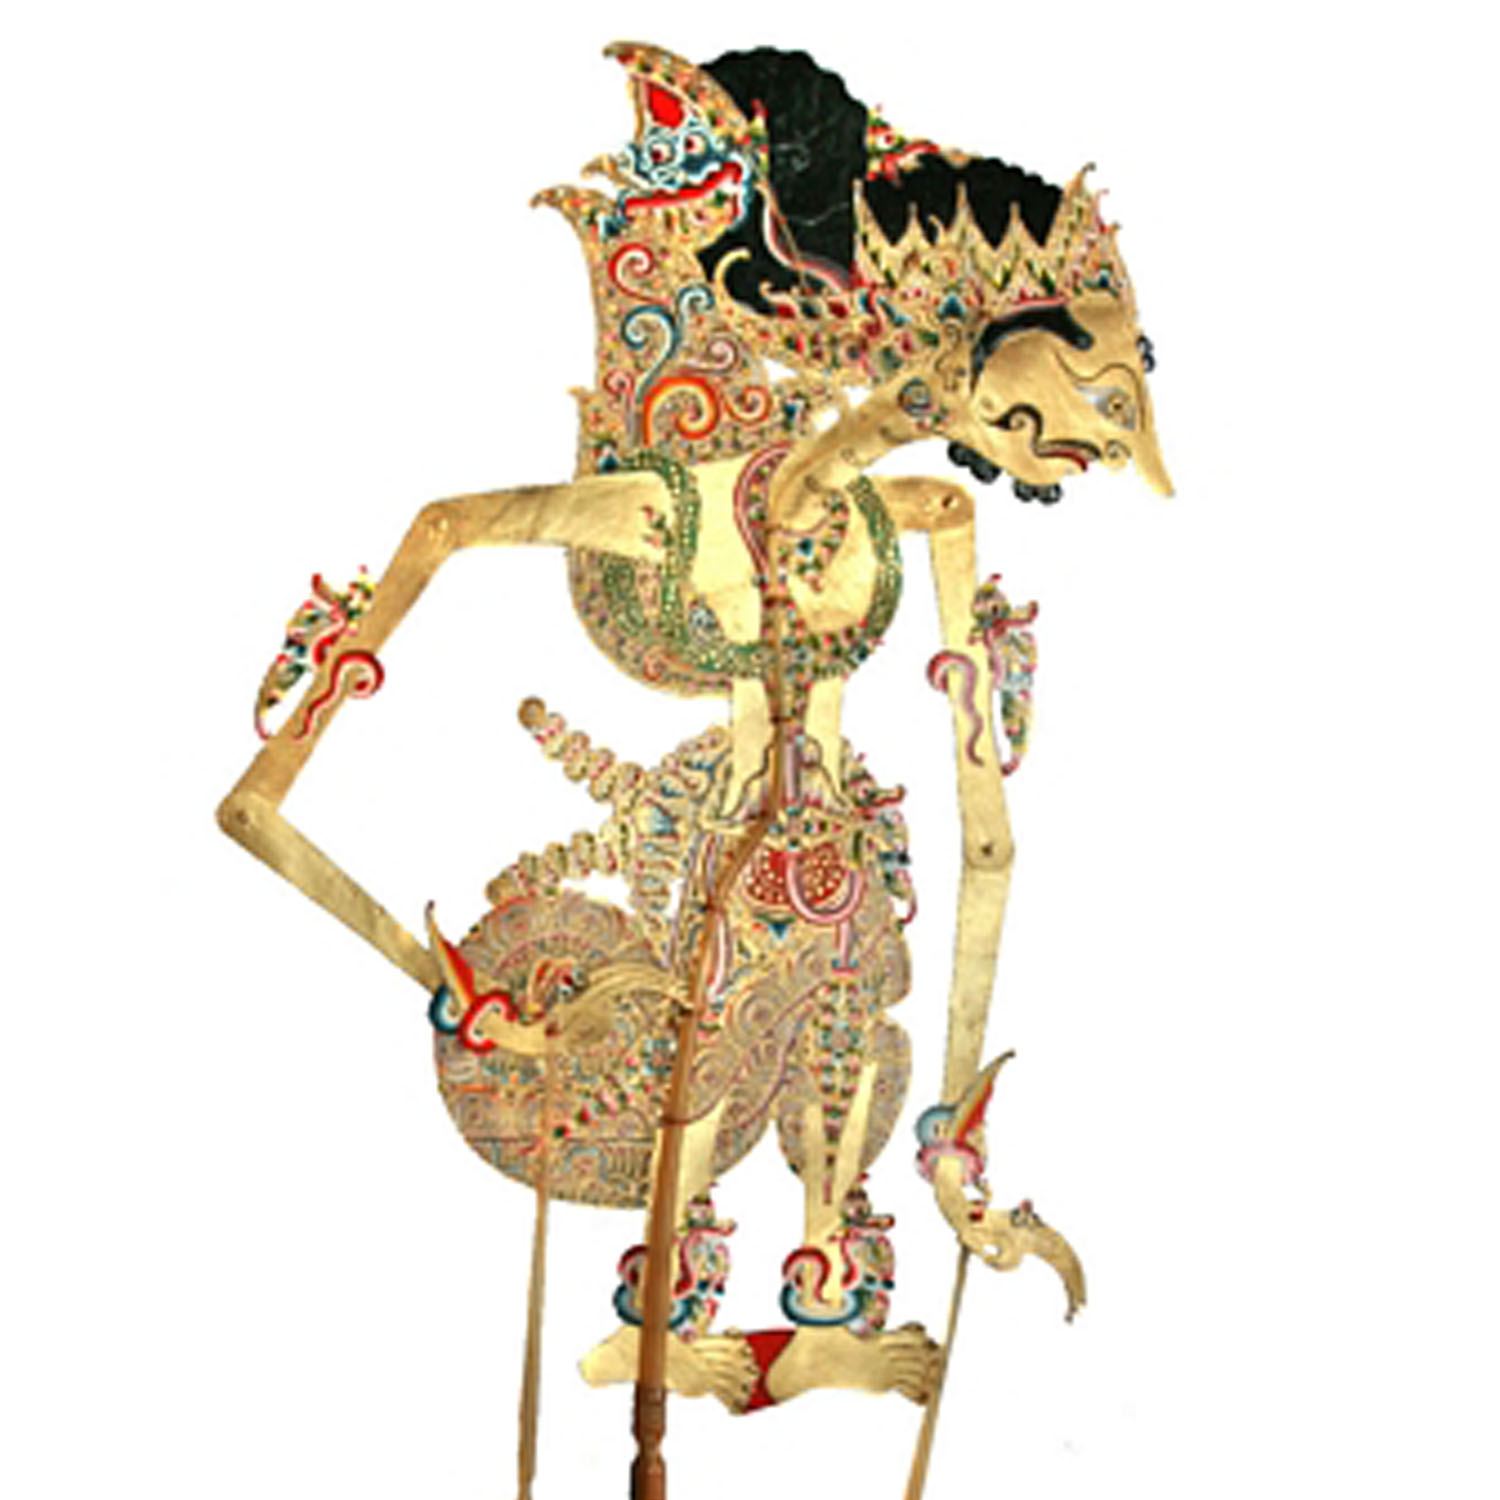 Search Results for “Wayang Kulit Puppets Characters” – Calendar 2015